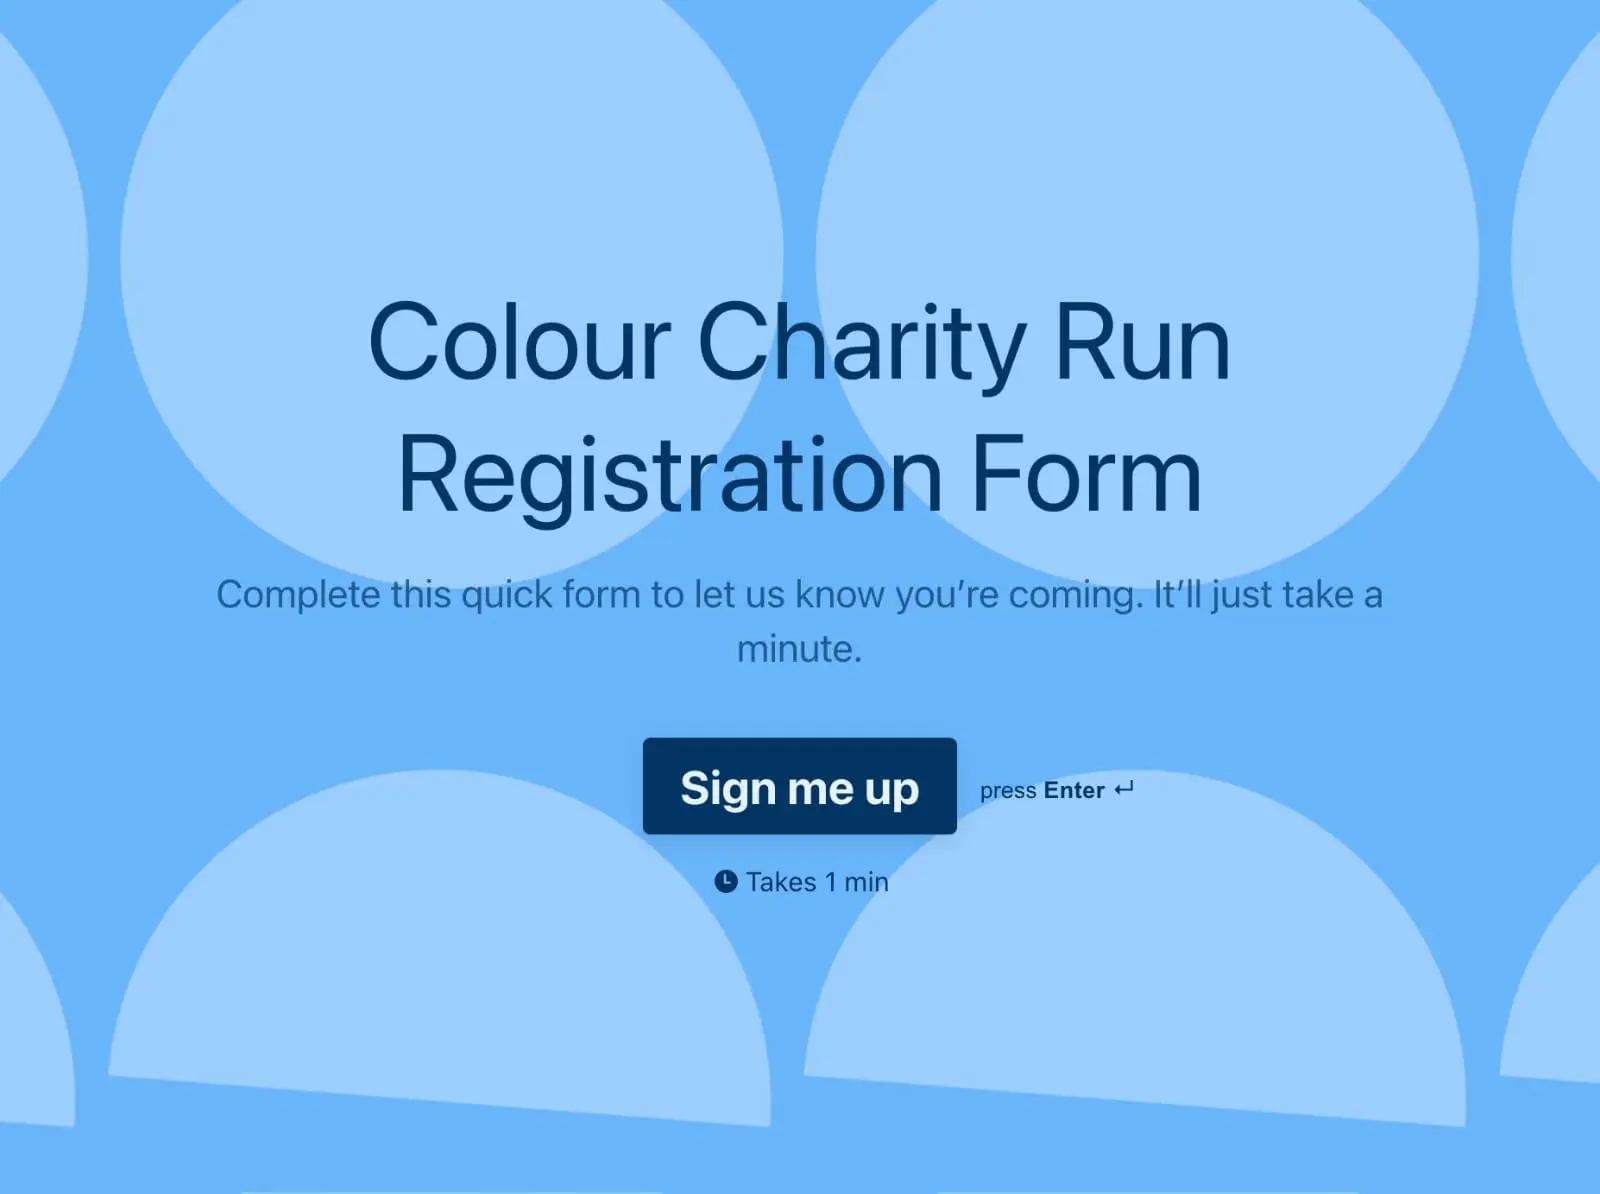 Colour Charity Run Registration Form Template Hero